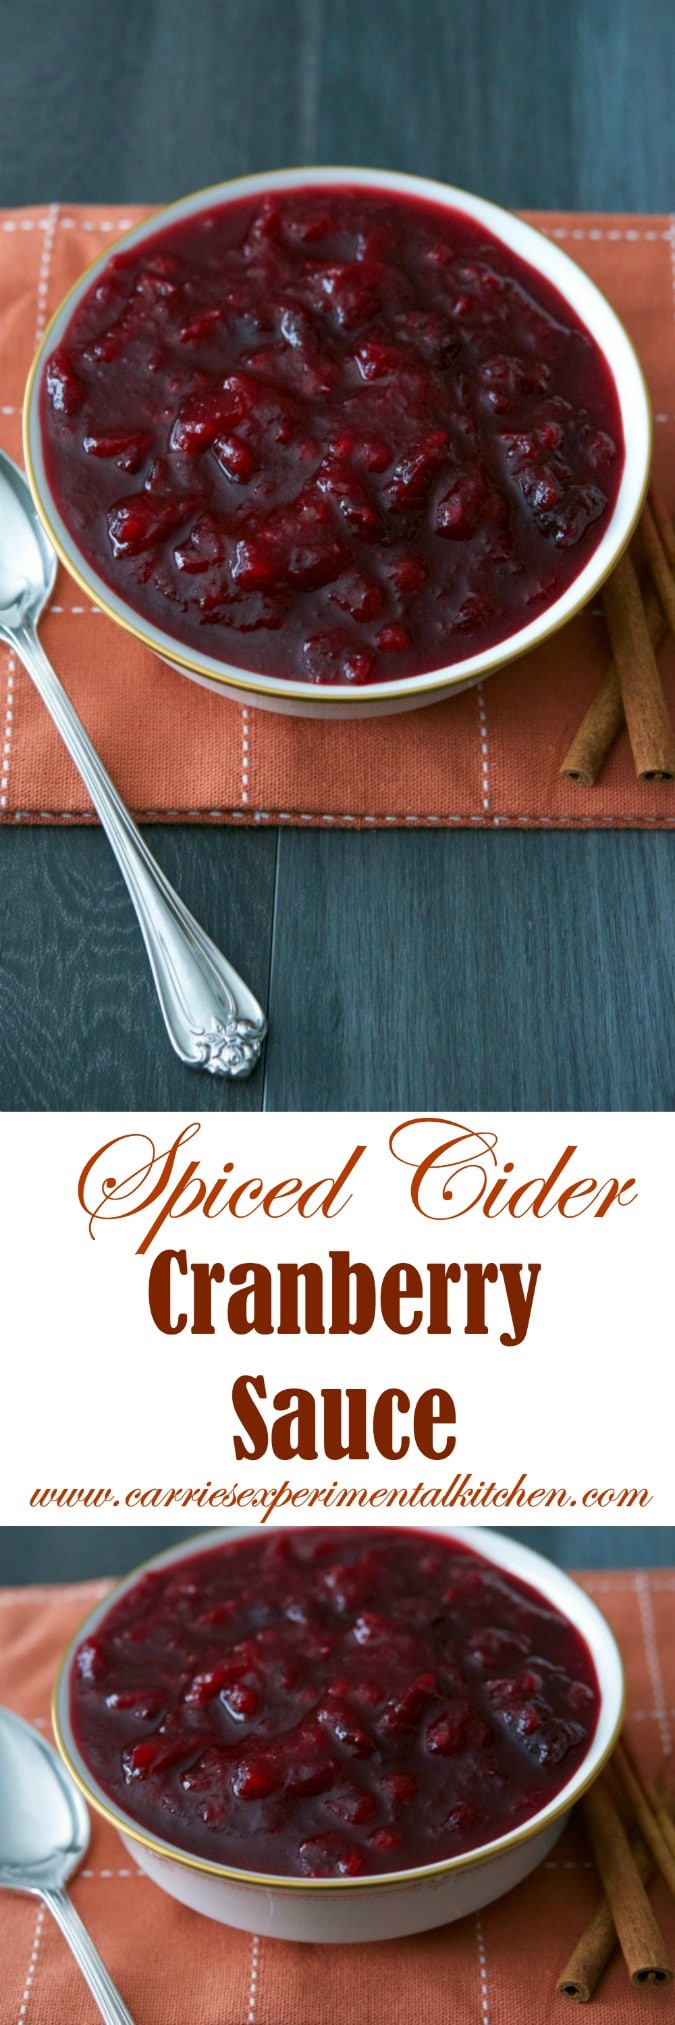 Spiced Cider Cranberry Sauce Carrie’s Experimental Kitchen